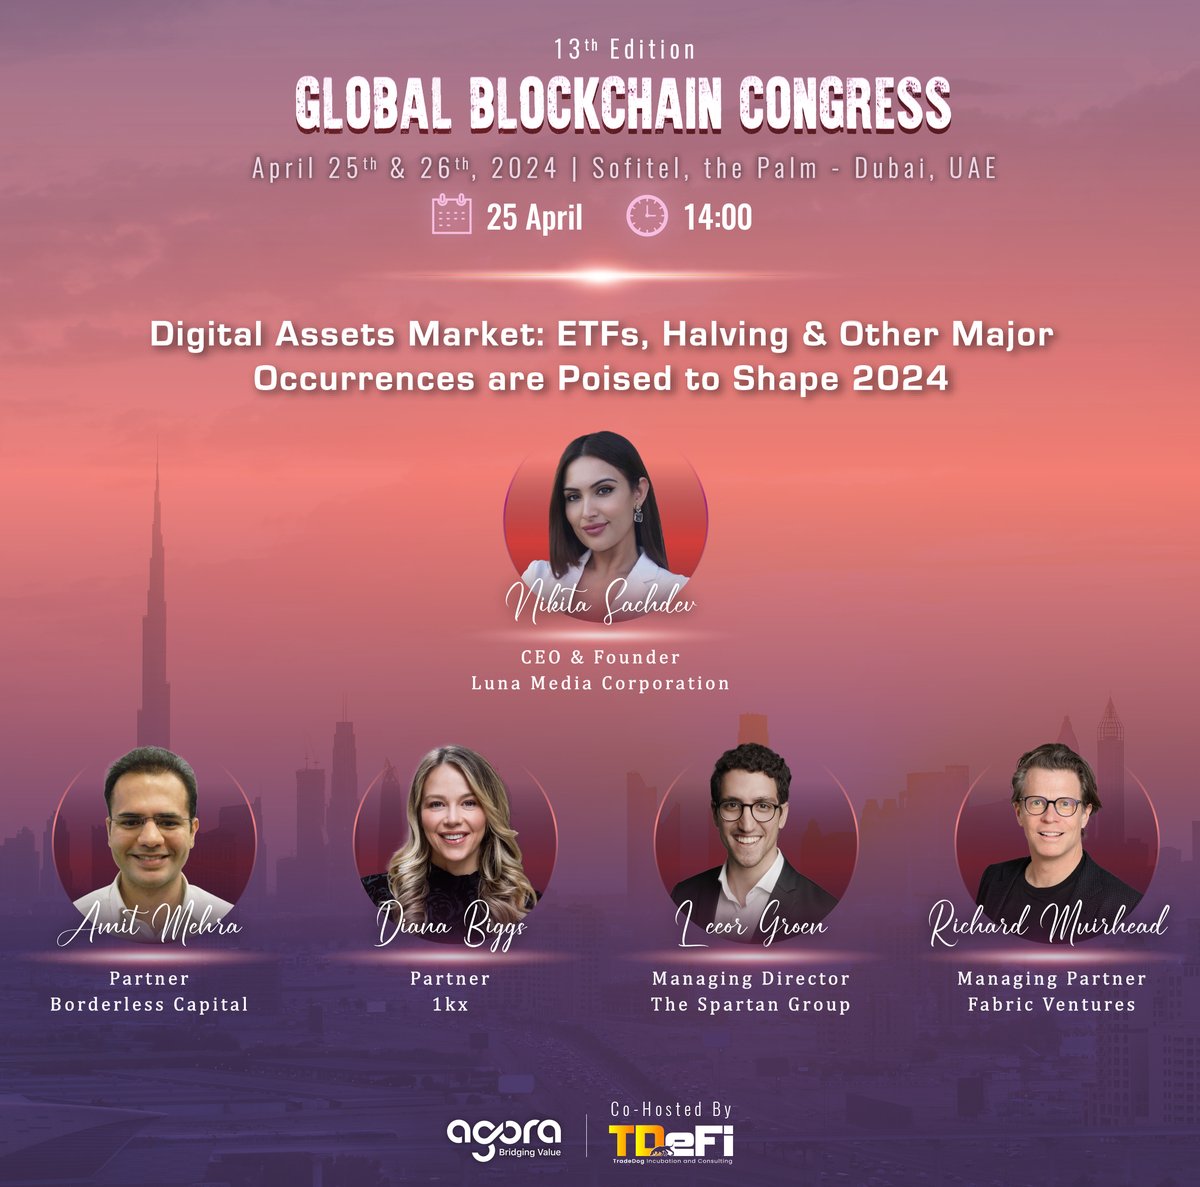 Digital Assets Market: ETFs, Halving, and Other Major Occurrences Join @nikichain, @amitm_eth, @DianacBiggs, @leeorgroen, and @richardmuirhead at the 13th GBC for an exciting panel discussion on digital assets market. Register here: bit.ly/13th-GBC #blockchain #dubai